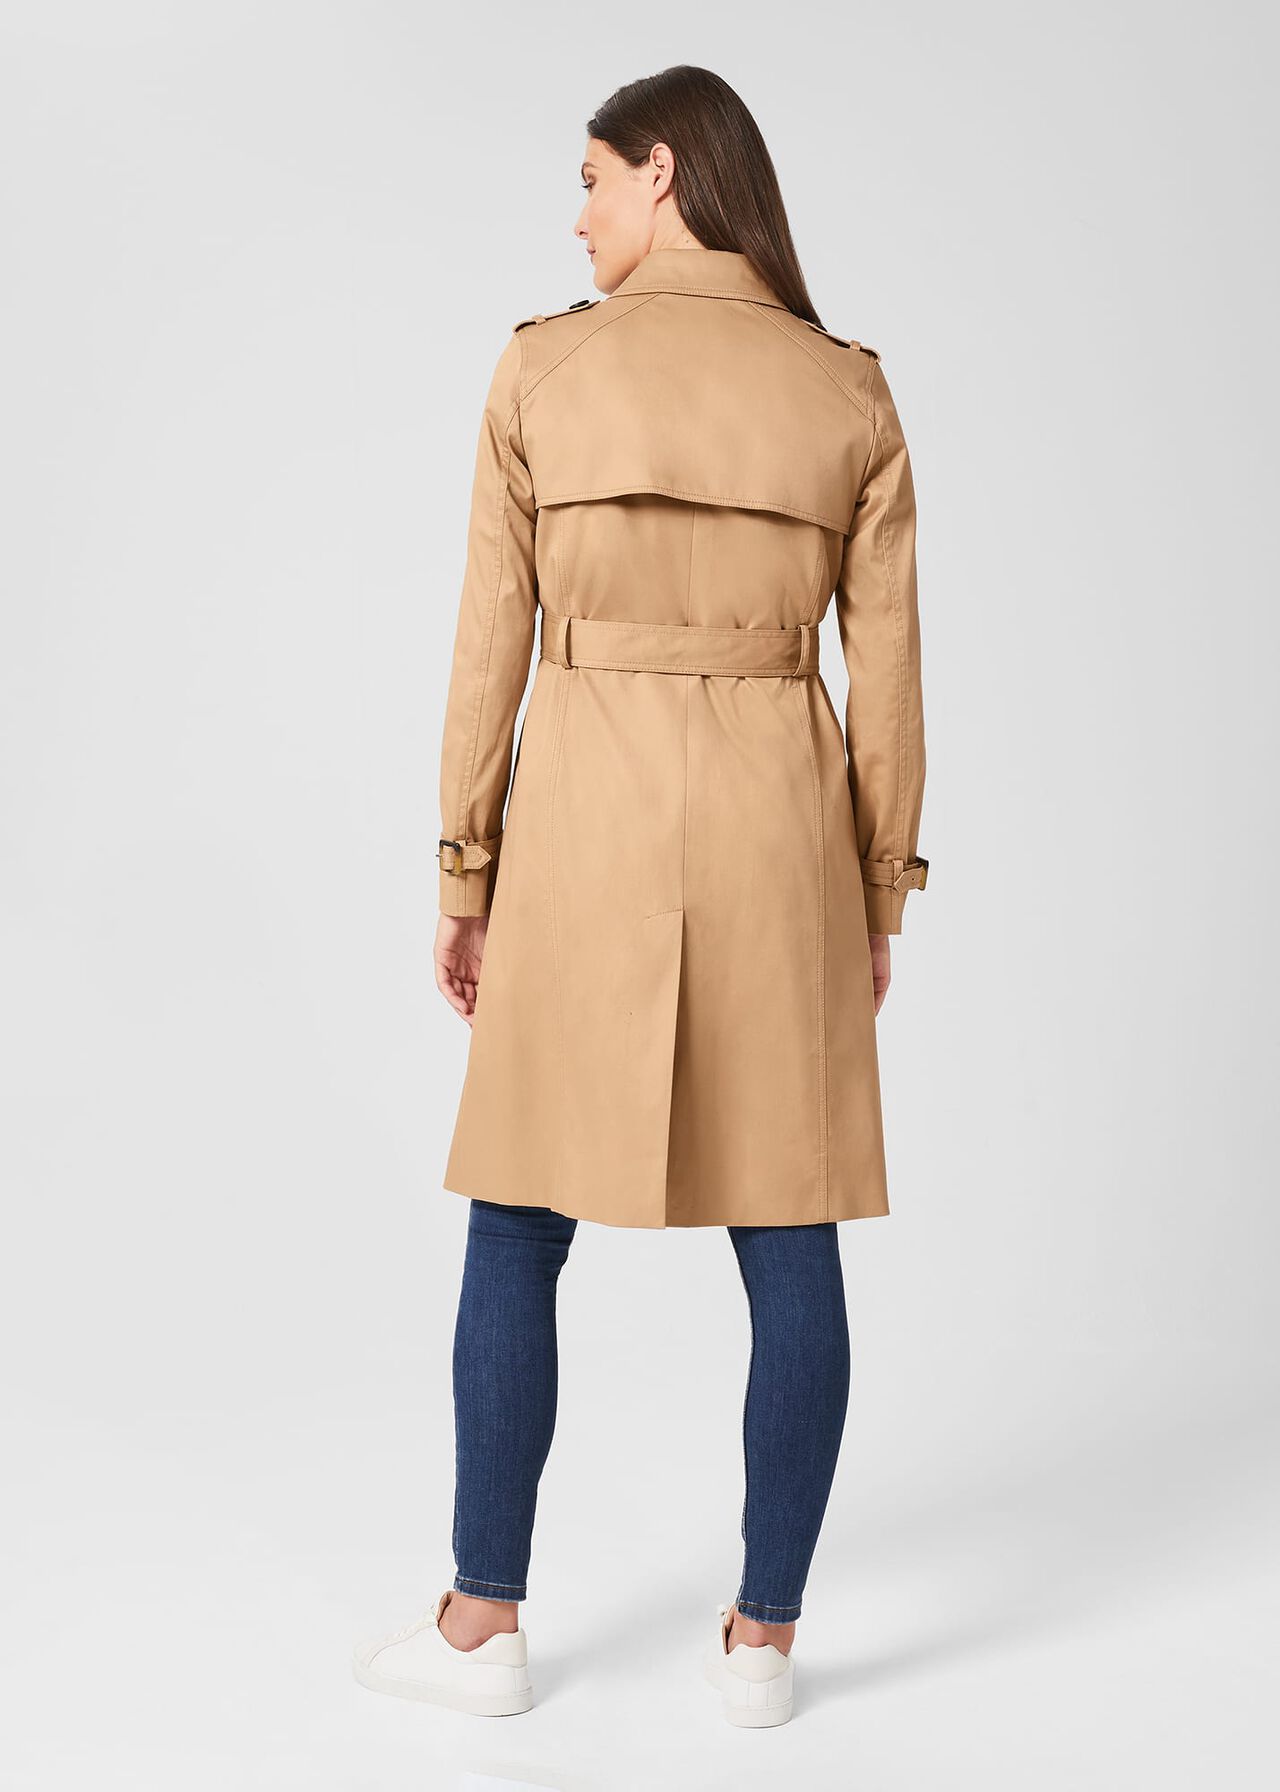 The Finley Trench Outfit